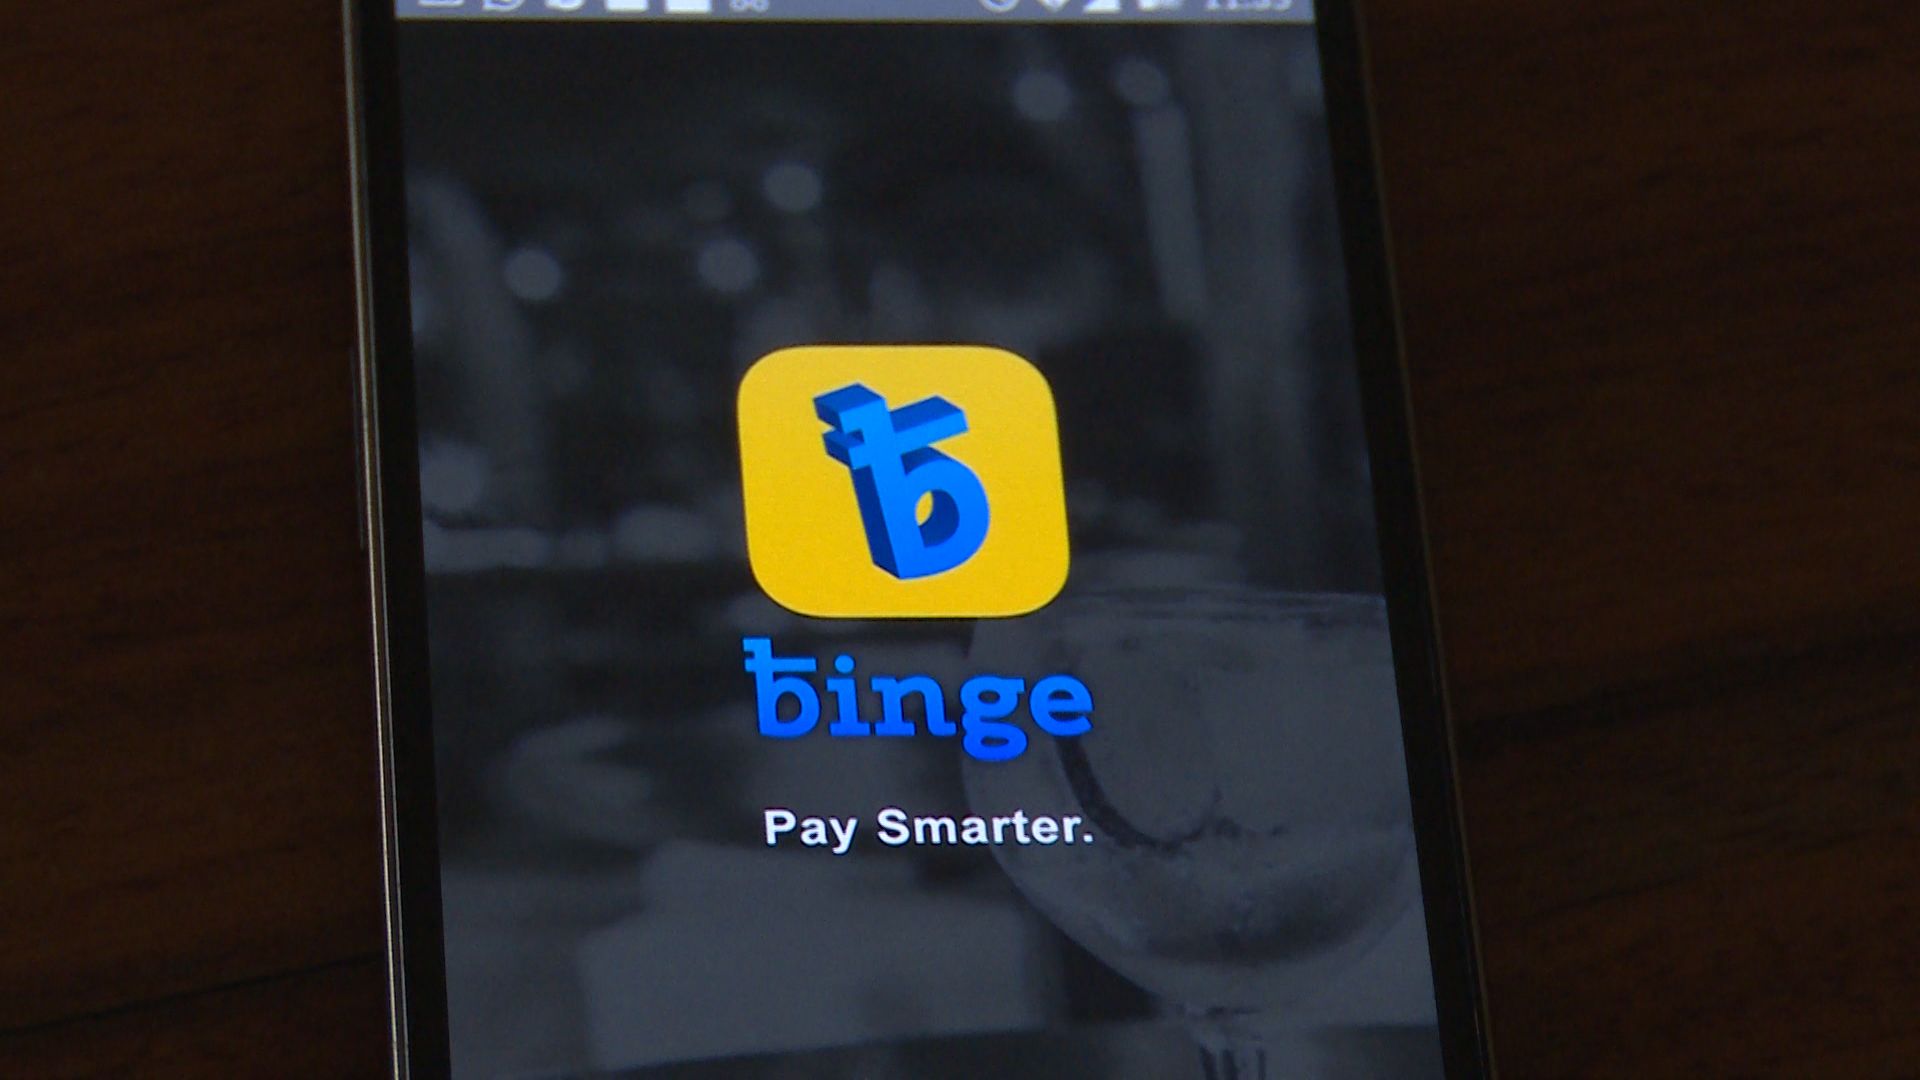 Enhance your dining experience with the Binge App